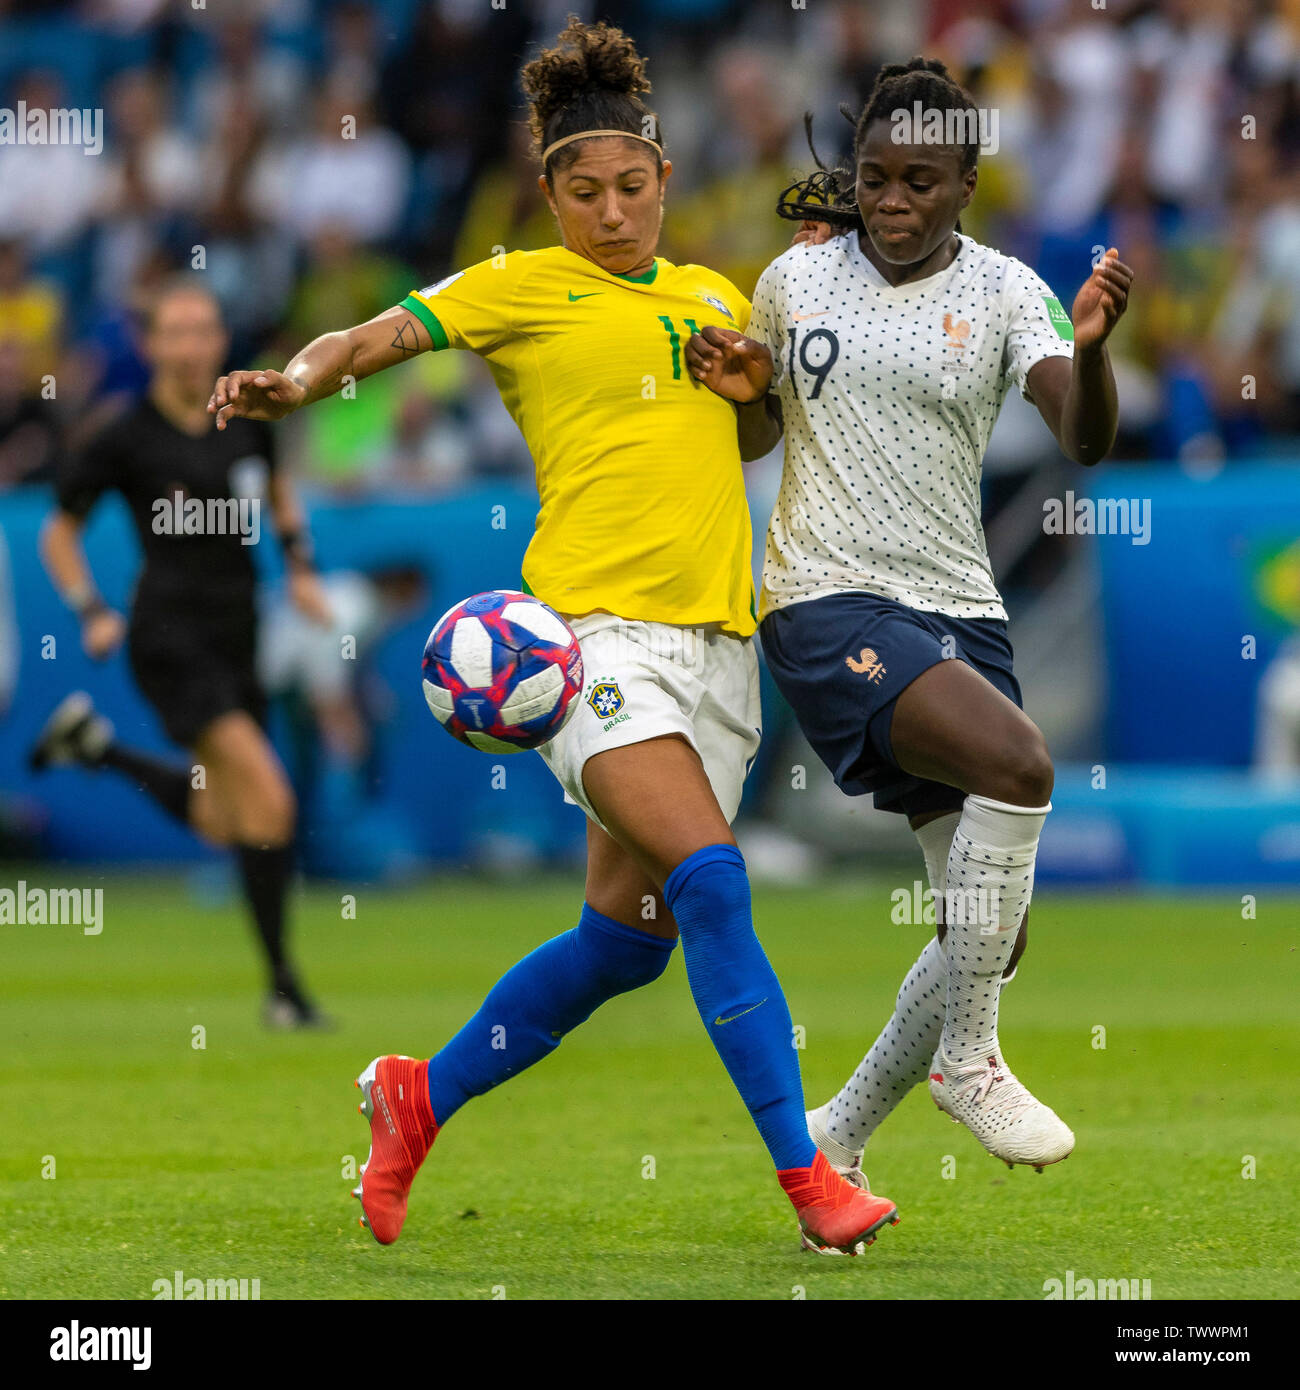 Le Havre, France. 23rd June, 2019. FRANCE V BRAZIL - Cristiane do Brasil and Griedge Mbock Bathy from France during a match between Brazil and France. World Cup Qualification Football. FIFA. Held at the Oceane Stadium in Le Havre, France. (Photo: Richard Callis/Fotoarena) Credit: Foto Arena LTDA/Alamy Live News Stock Photo